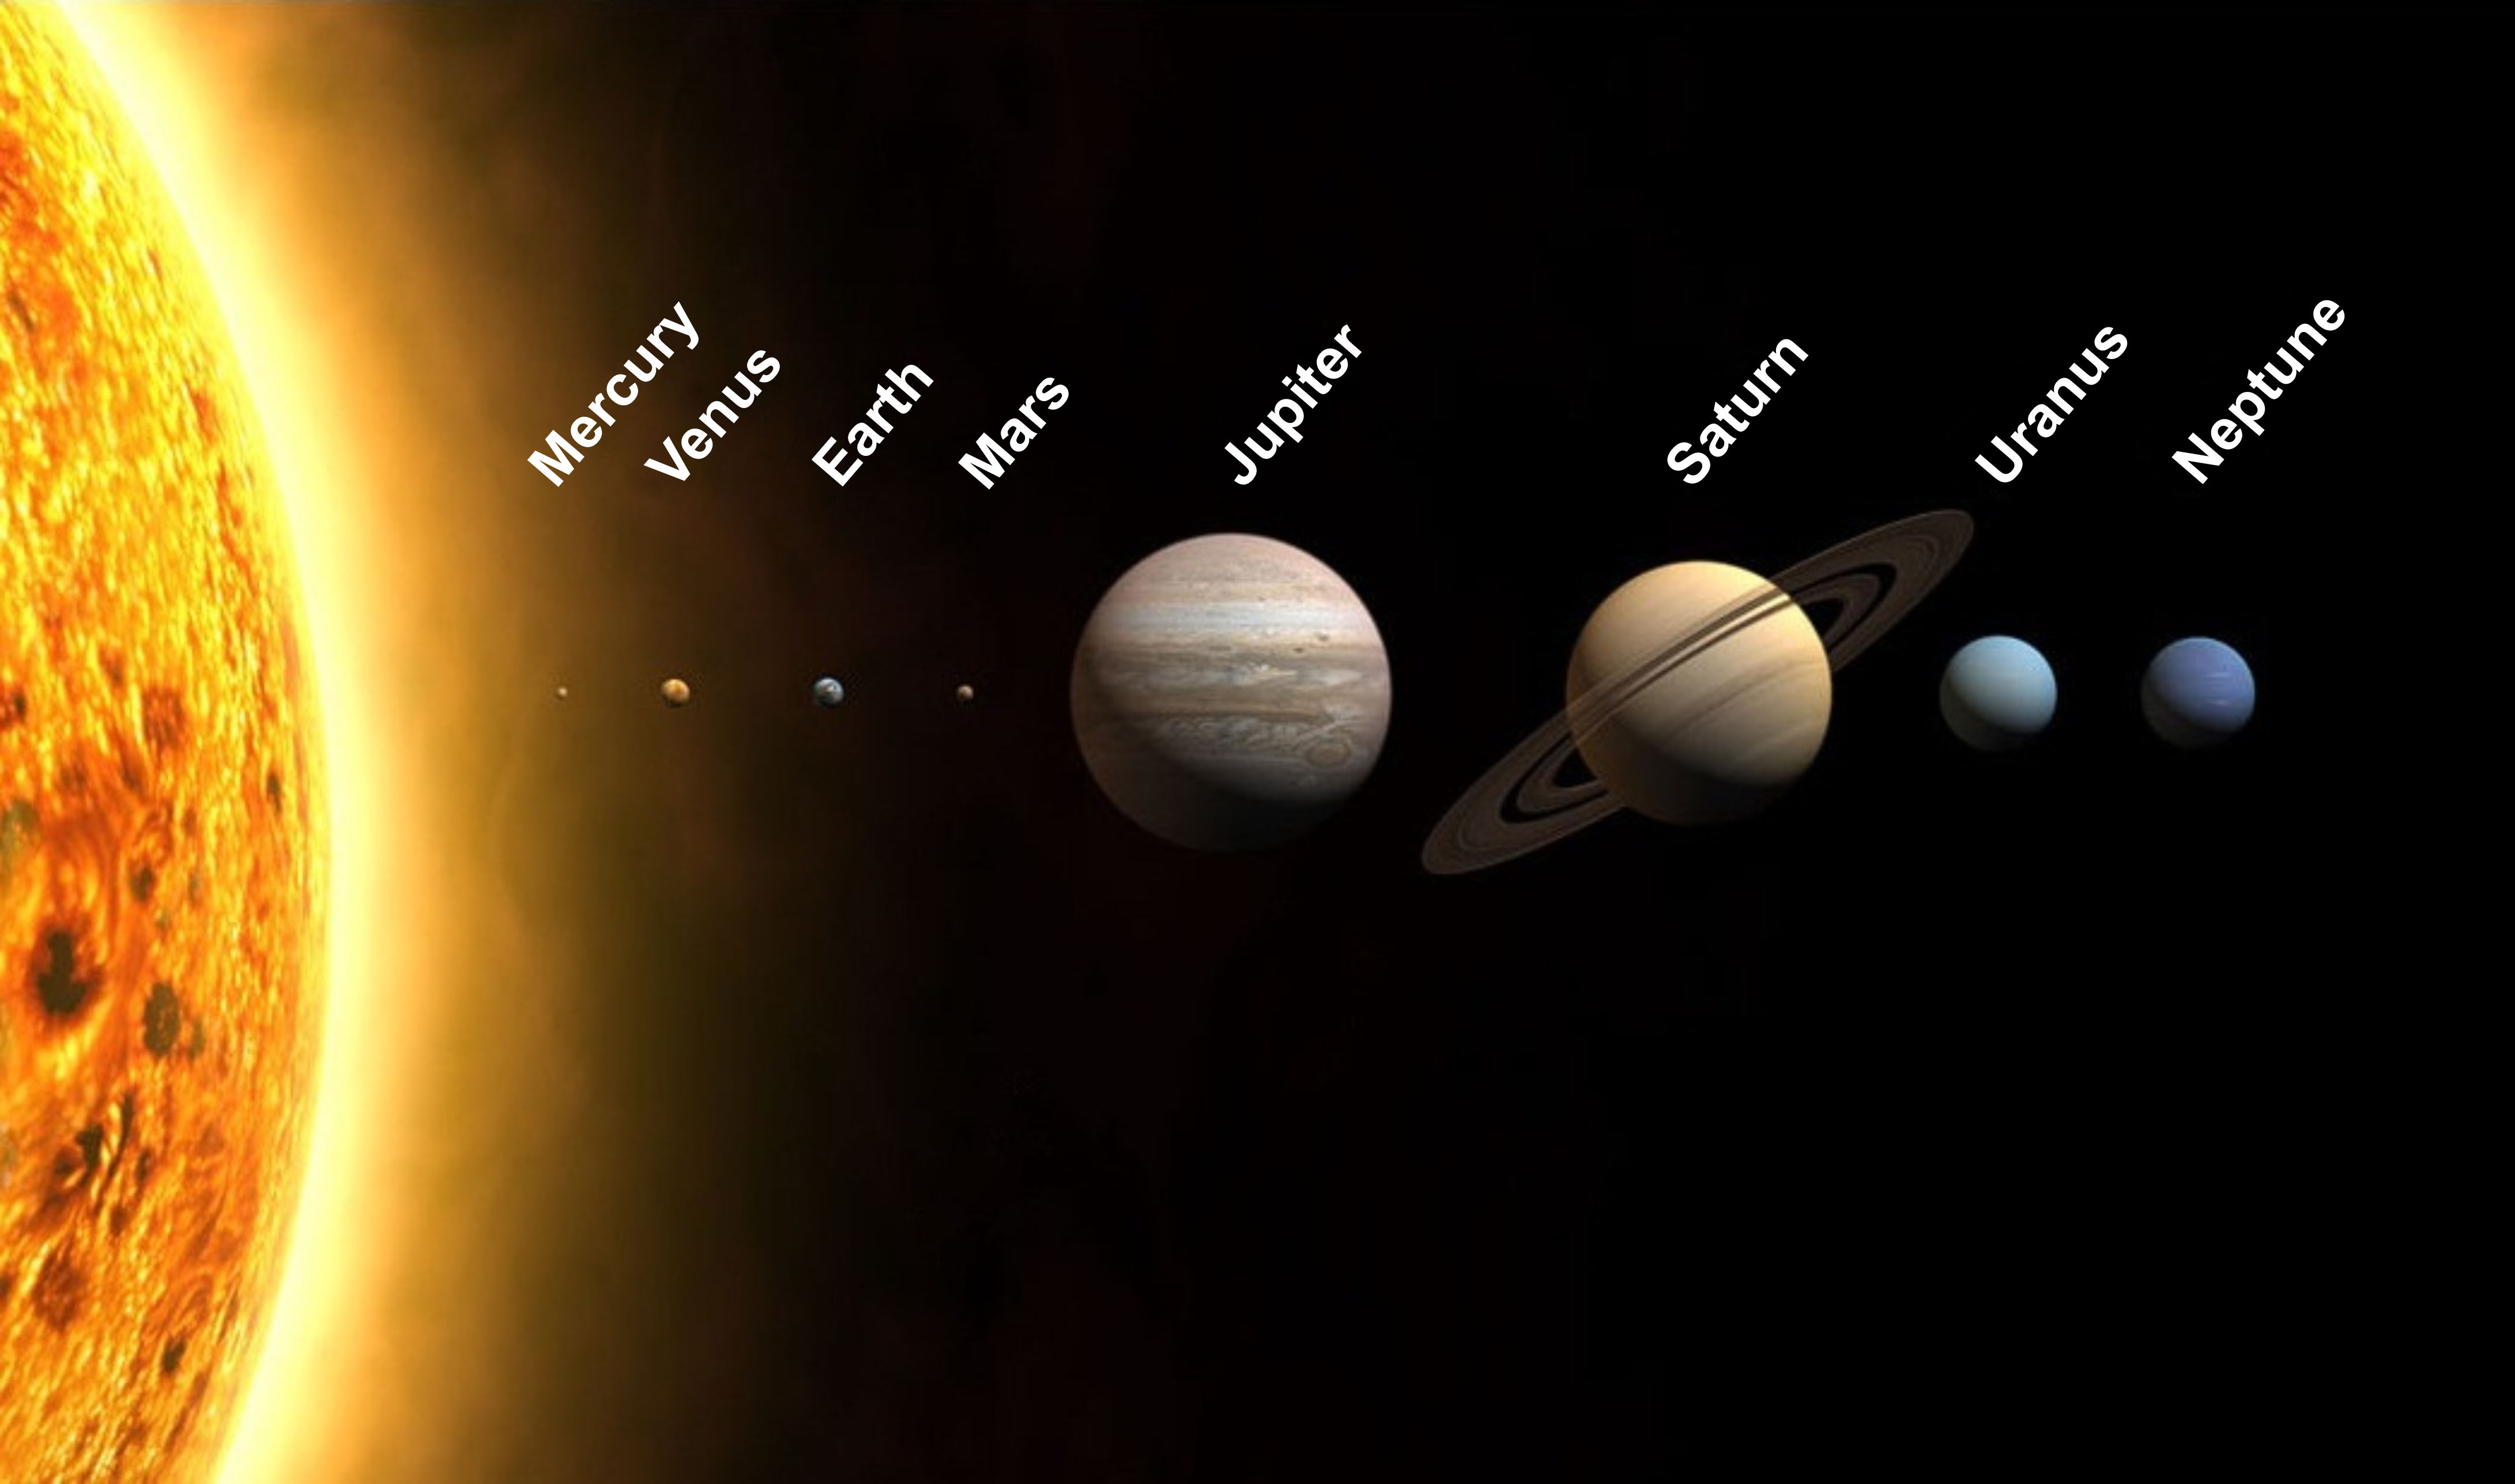 https://commons.wikimedia.org/wiki/File:Planets2013.svg